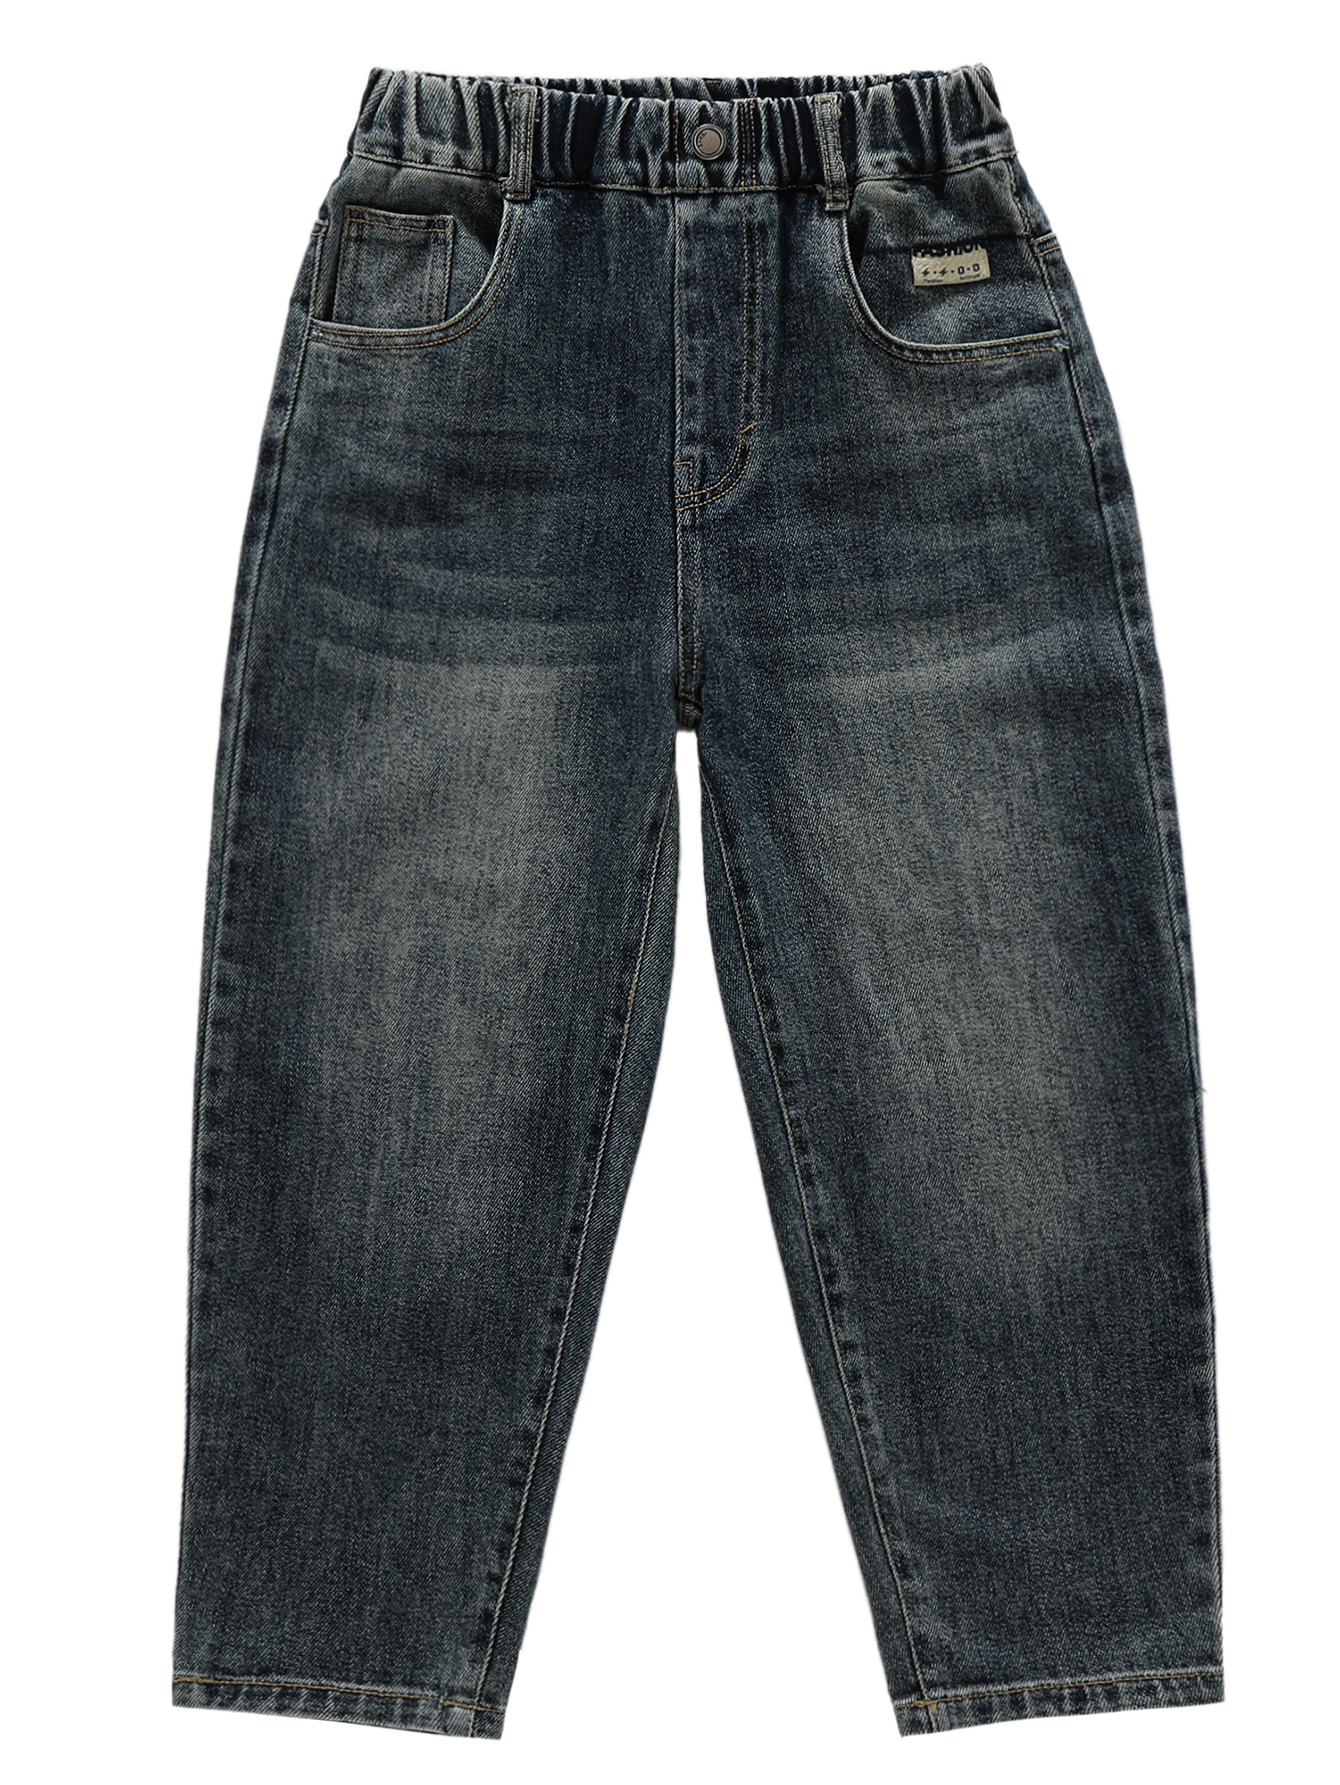 simple chunky daddy pants buy kids jeans models classic blue free sample fast shipping